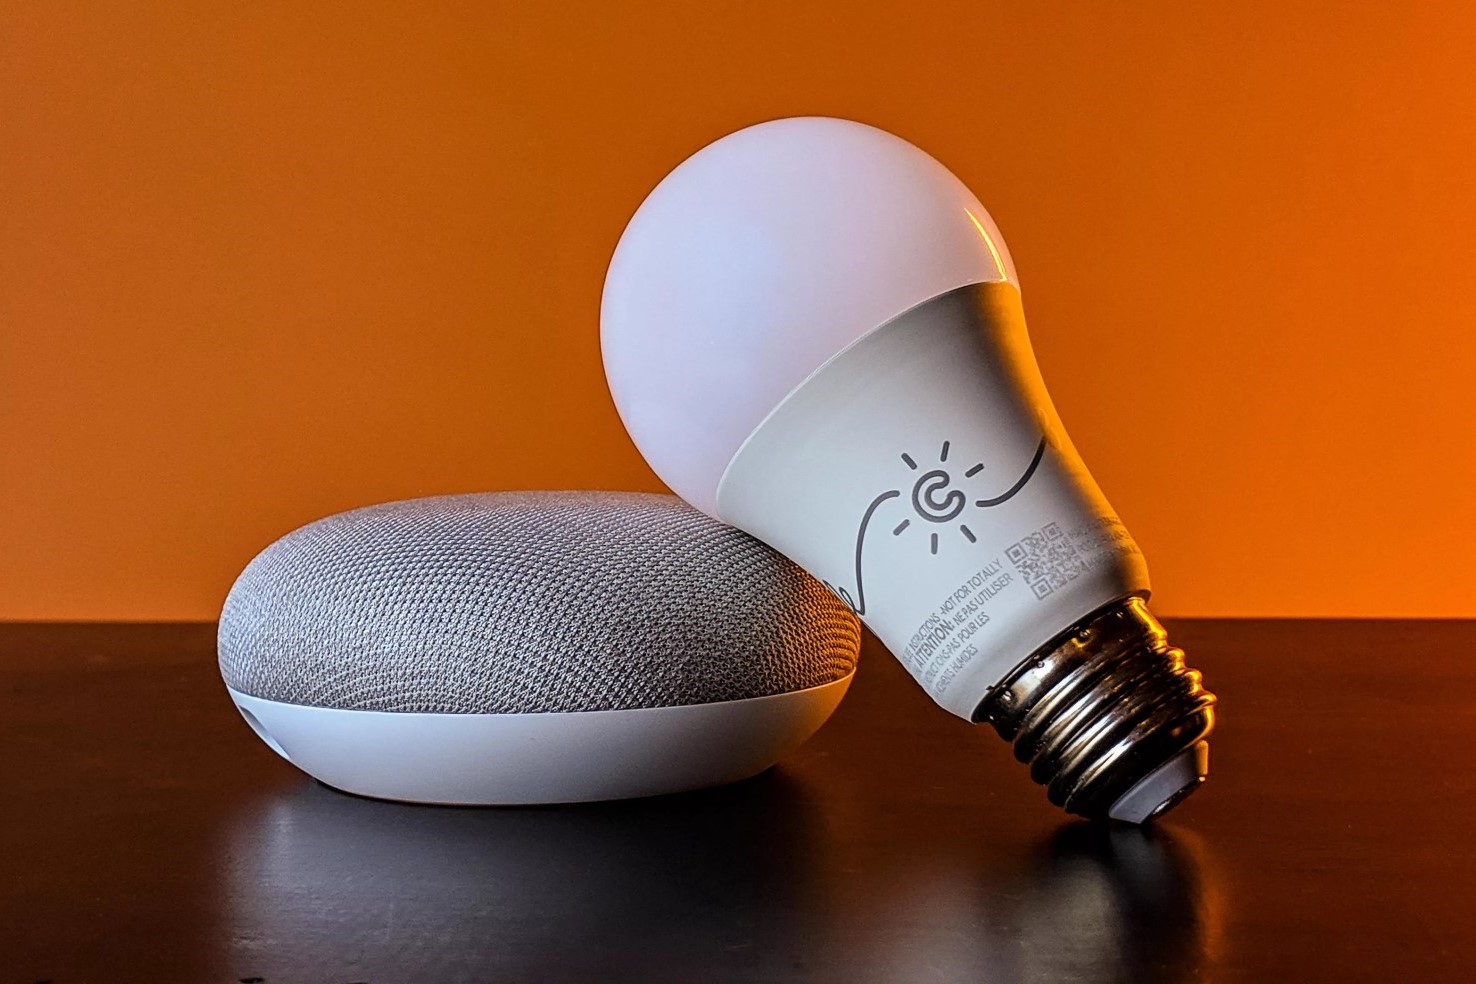 How Do I Connect Google Home To Philips Hue